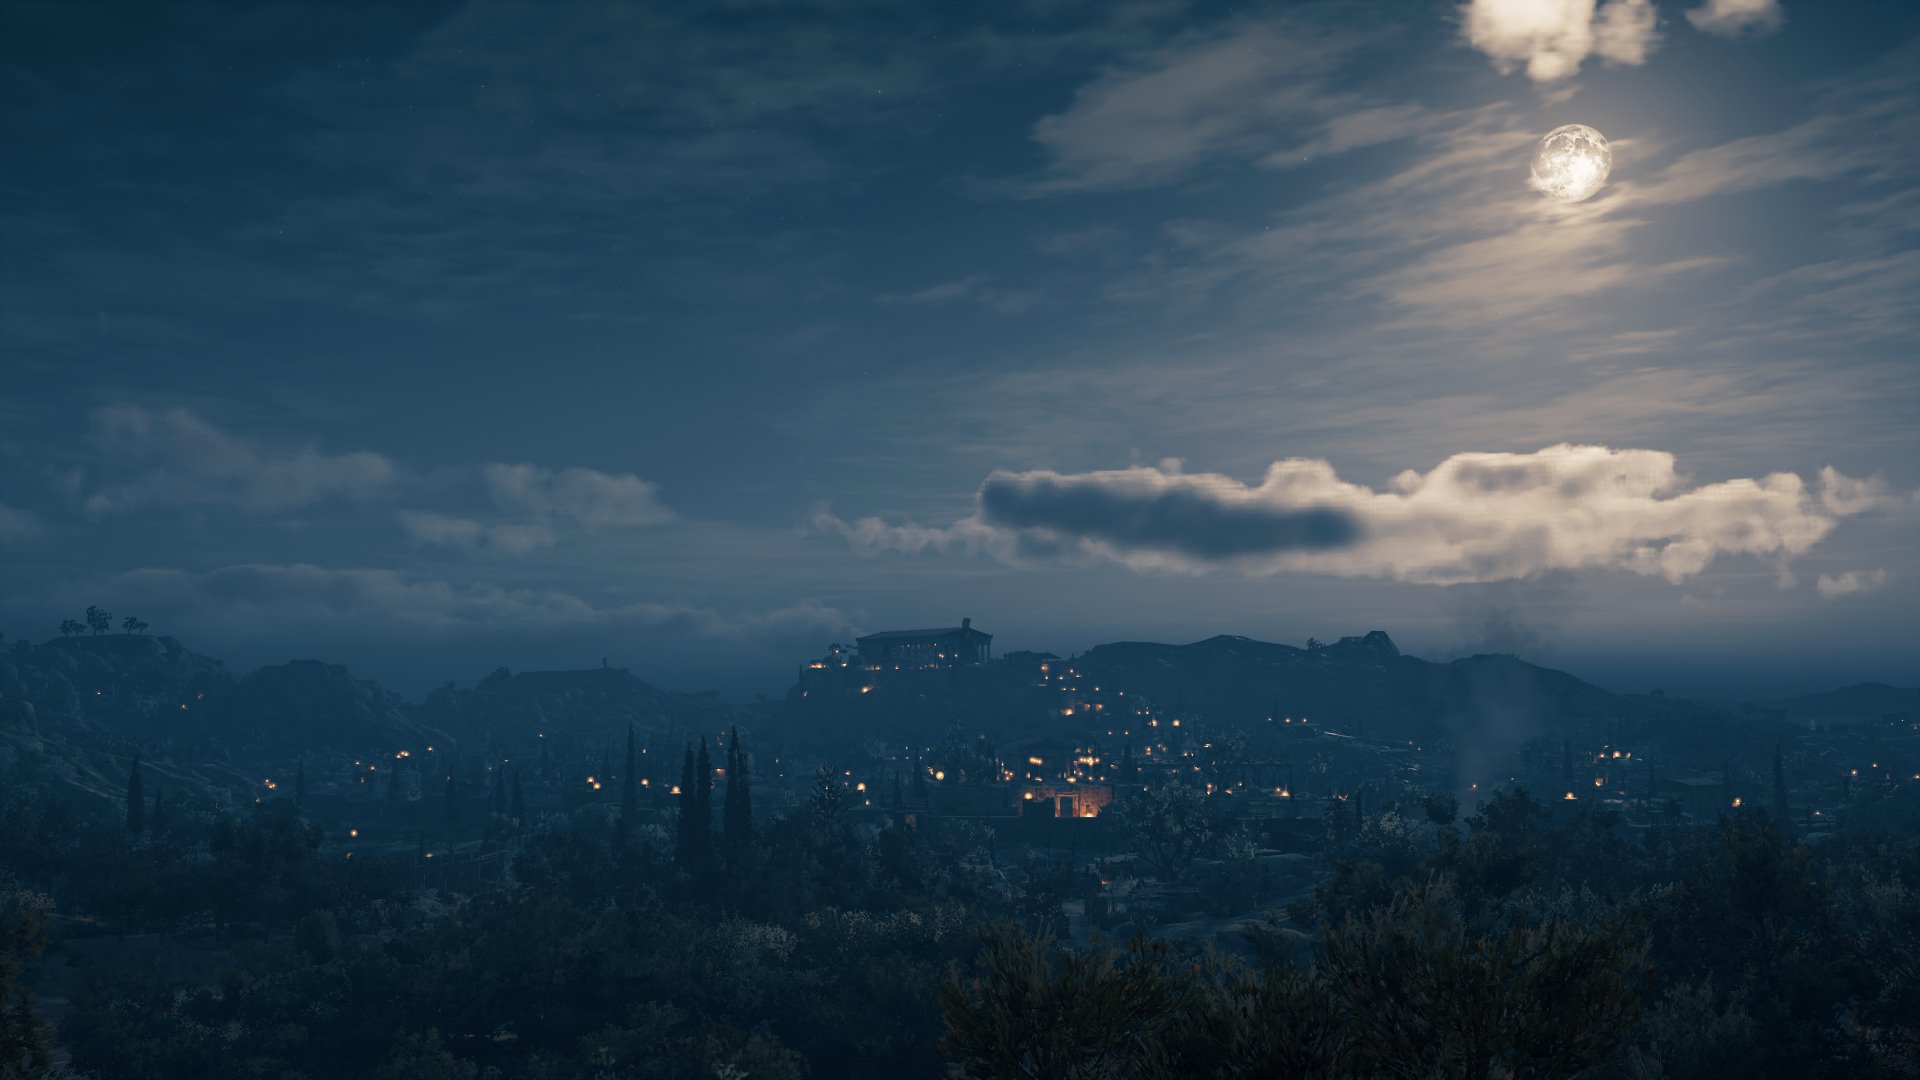 General 1920x1080 nature Assassin's Creed Odyssey sky night video games screen shot